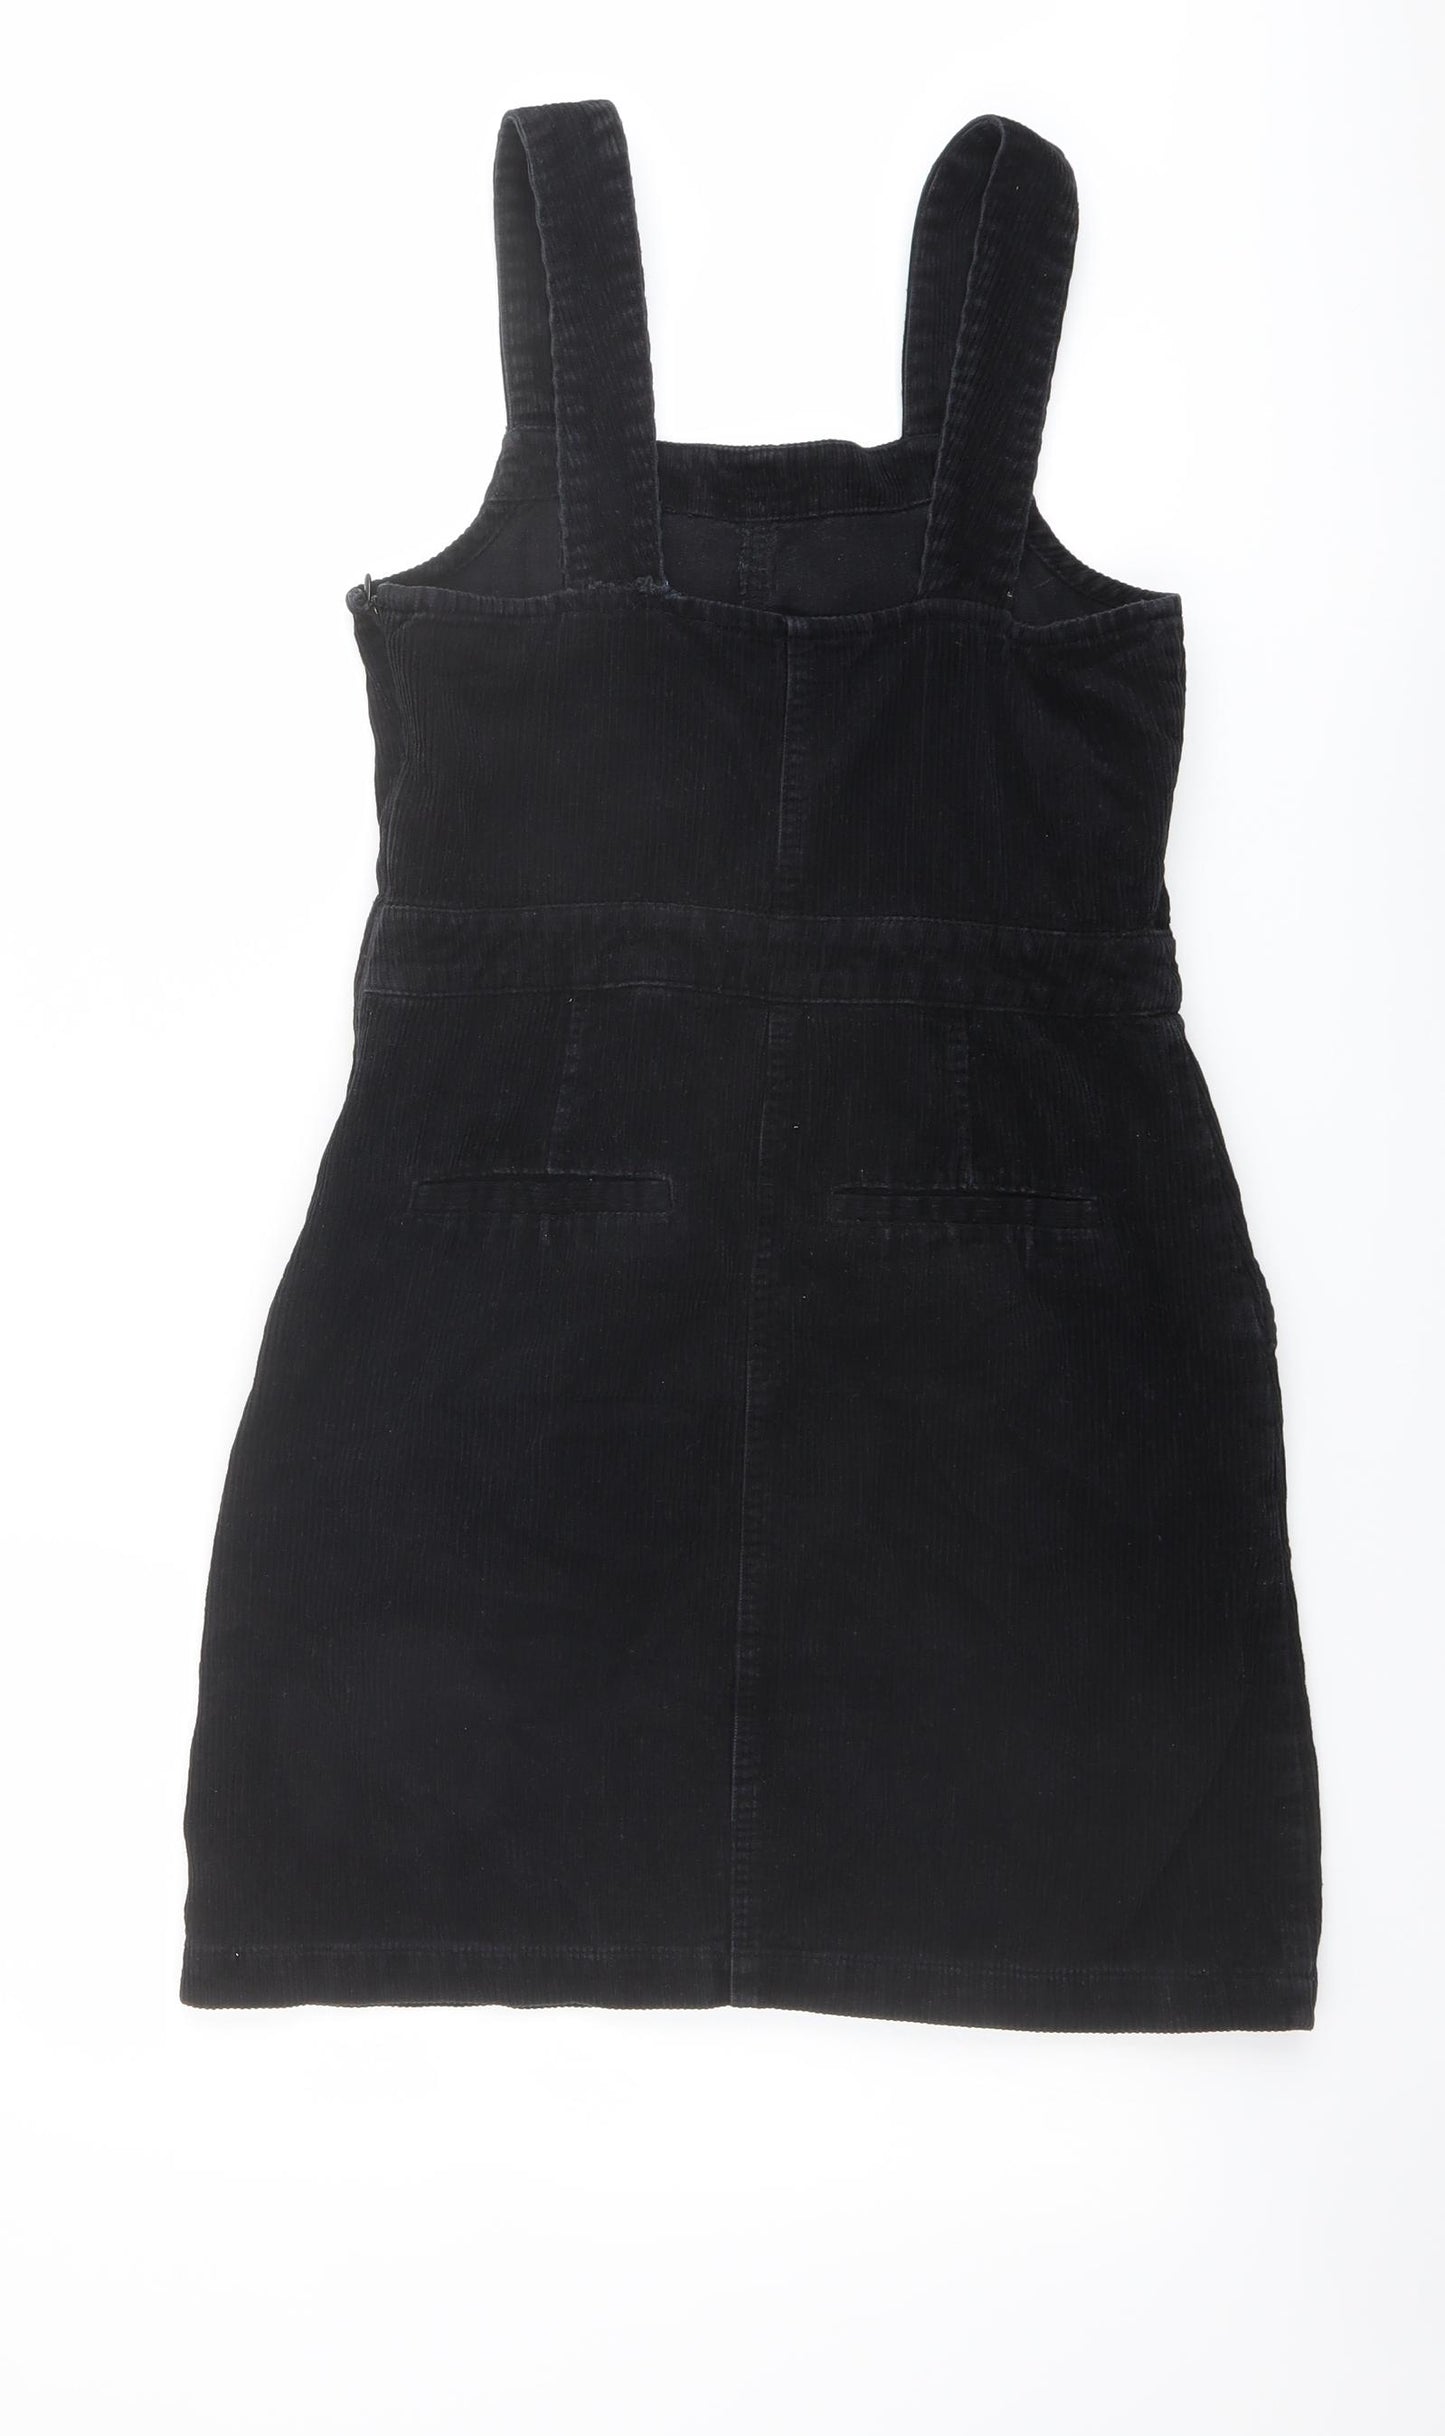 Dorothy Perkins Womens Black Cotton Pinafore/Dungaree Dress Size 8 Square Neck Zip